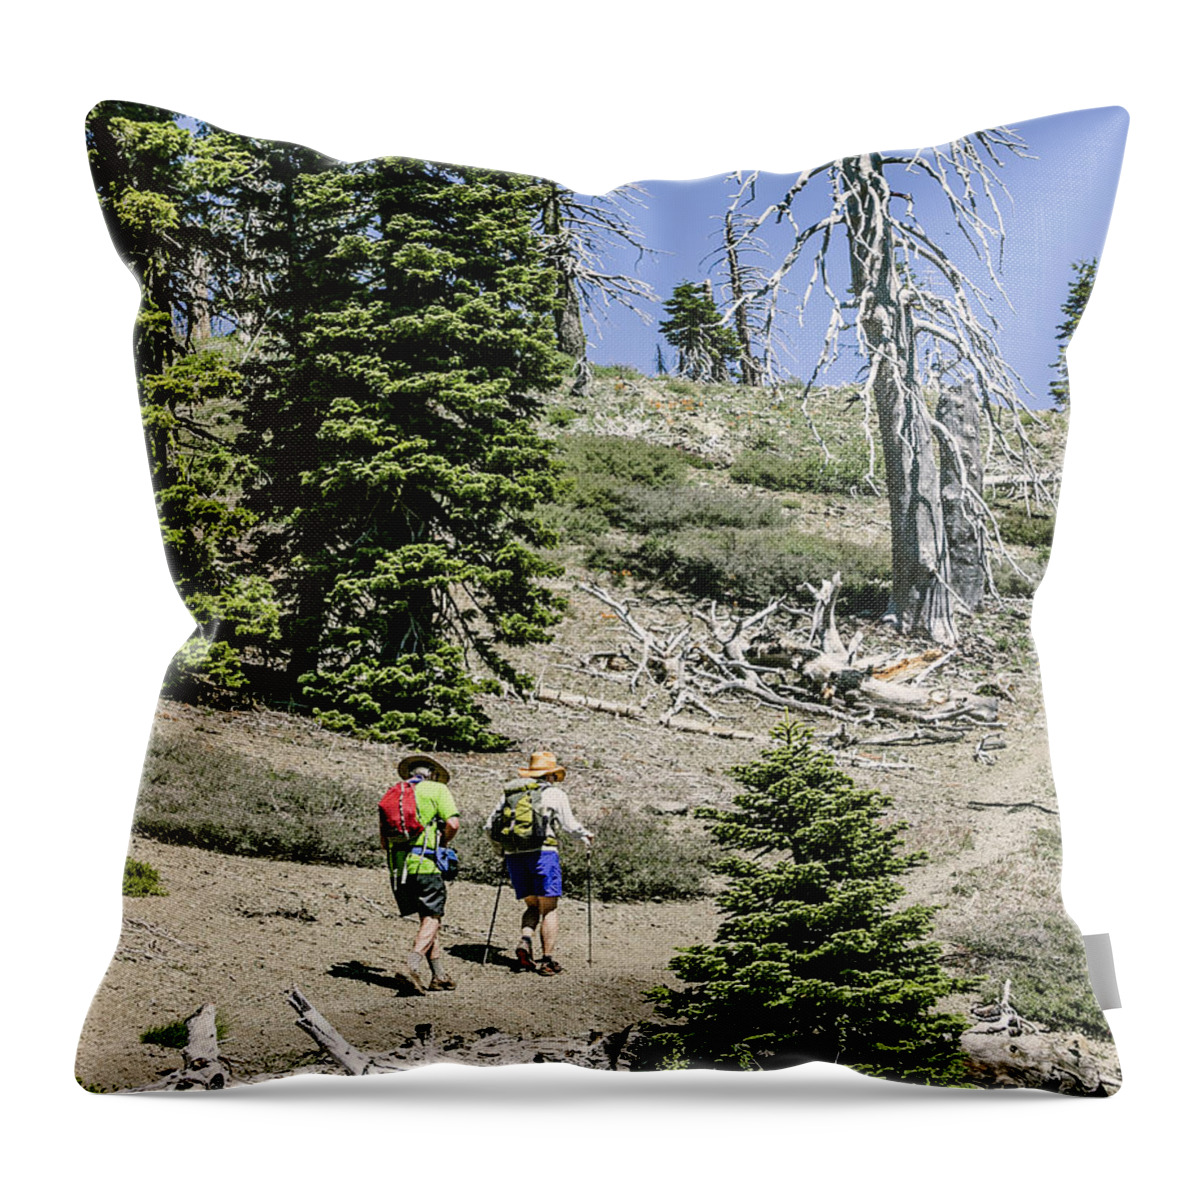 Mountain Throw Pillow featuring the photograph Rear View Of Two Day Hikers by Ron Koeberer